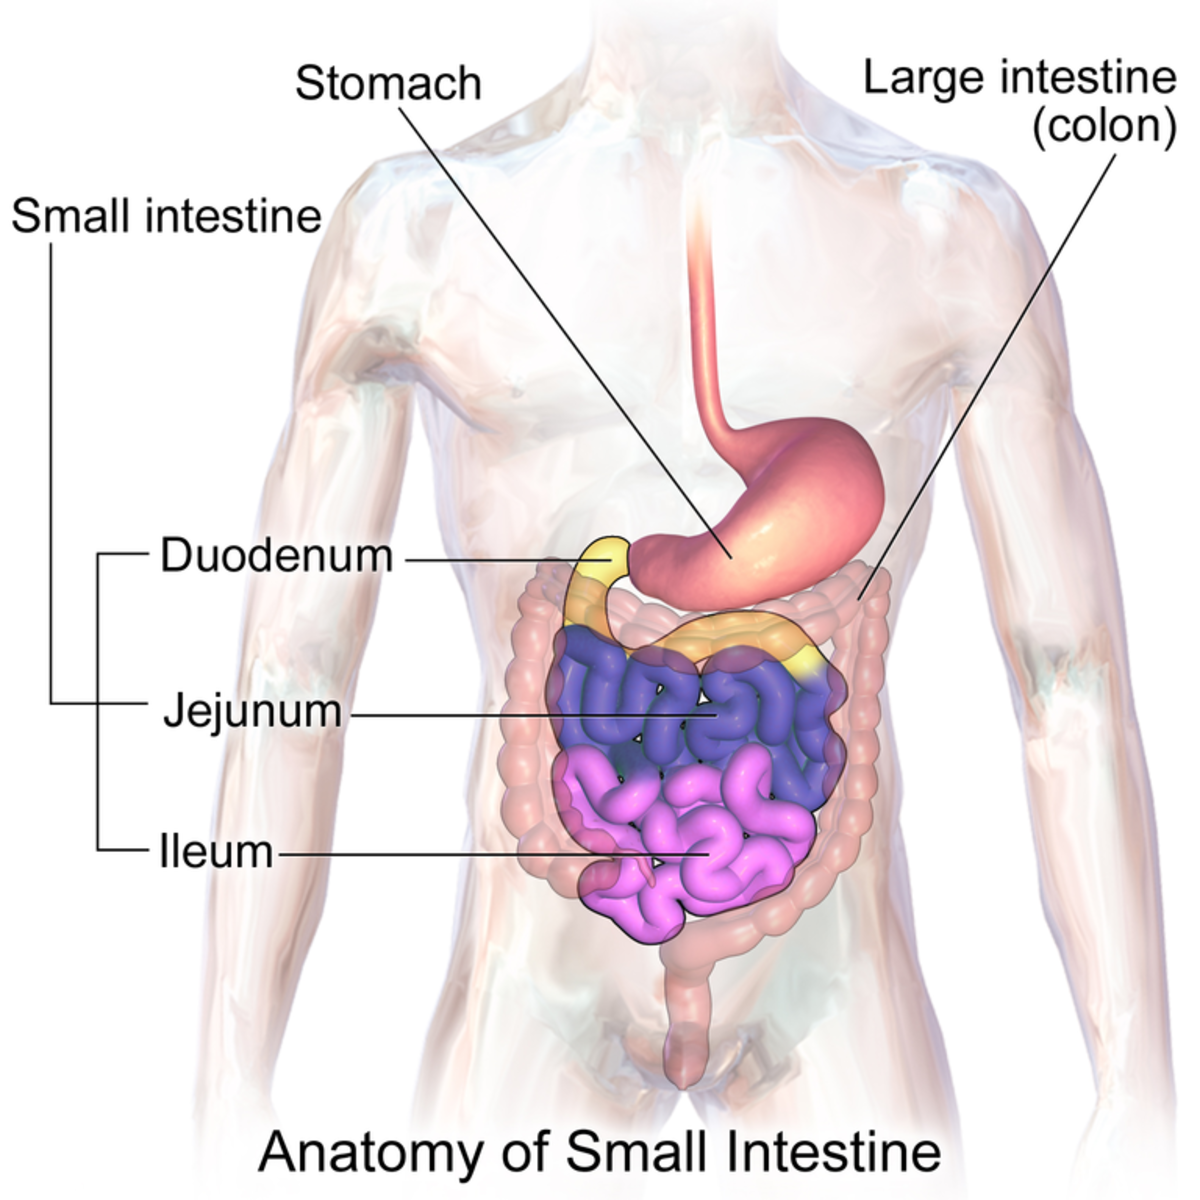 Inflammation in Crohn's disease may occur anywhere in the digestive tract but often develops in the ileum.